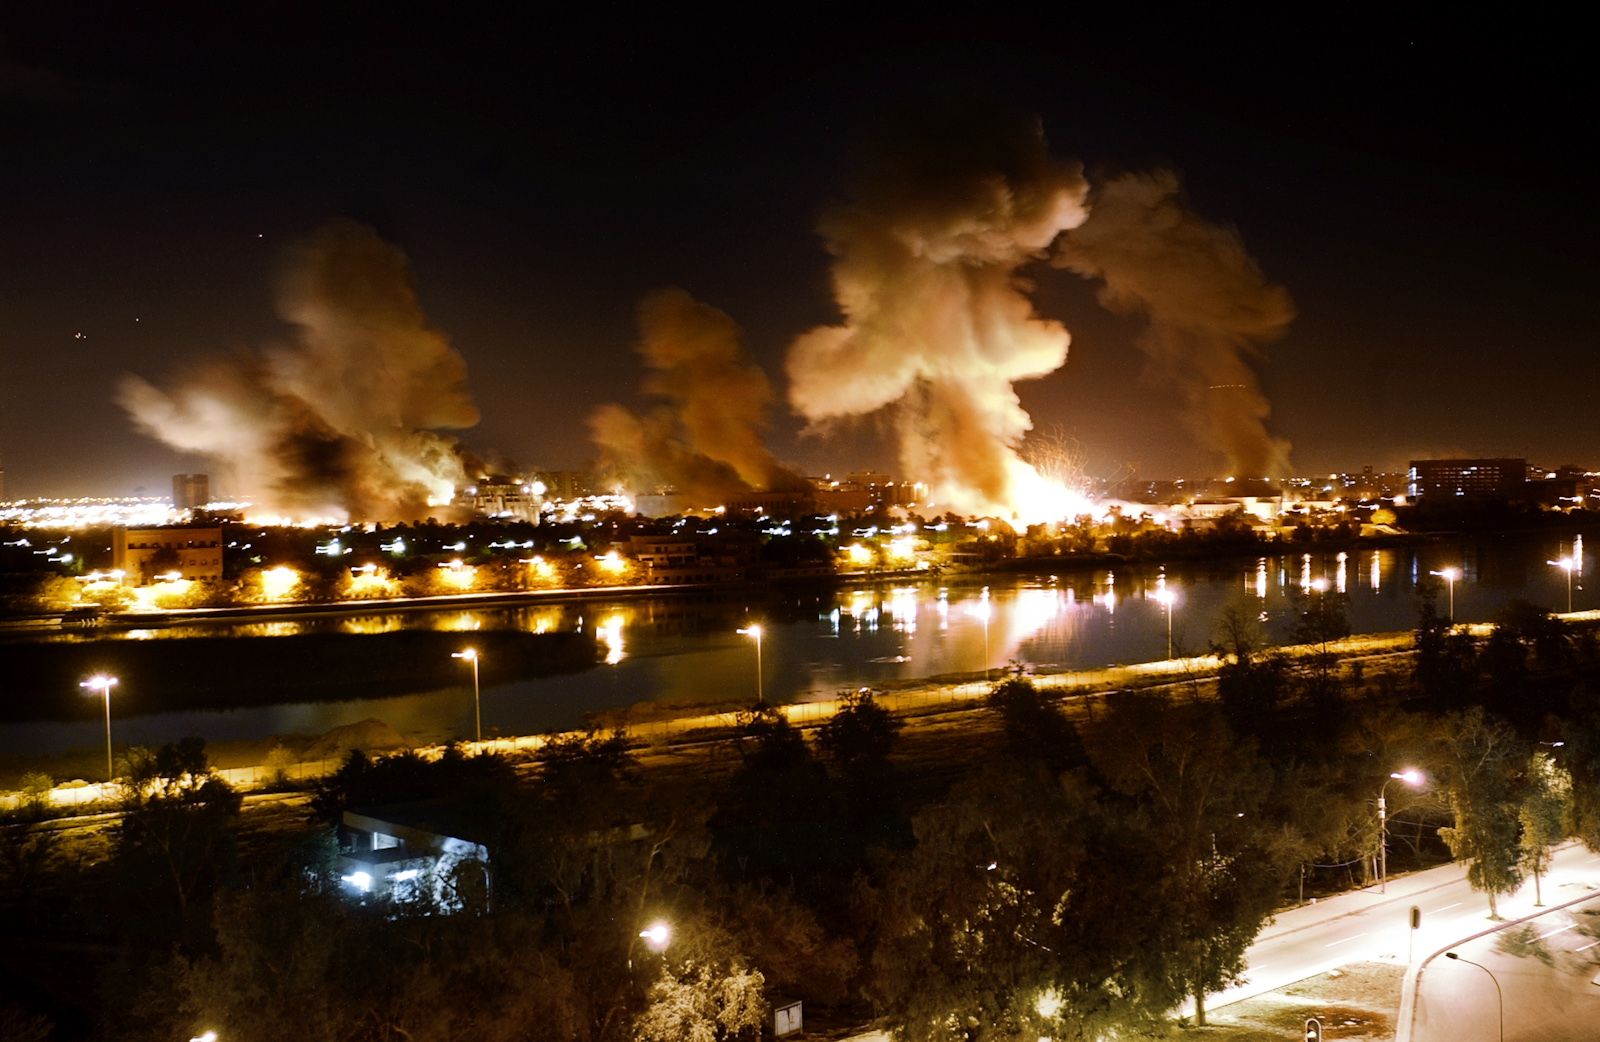 An explosion rocks a building in the palace complex of Saddam Hussein, during the U.S. 'Shock and Awe' air raids which marked the beginning of the occupation in Baghdad, Iraq, April 21, 2003. The complex on the banks of the Tigris later became what is now known as the Green Zone and houses both the Iraqi legislation as well as key U.S. installations.